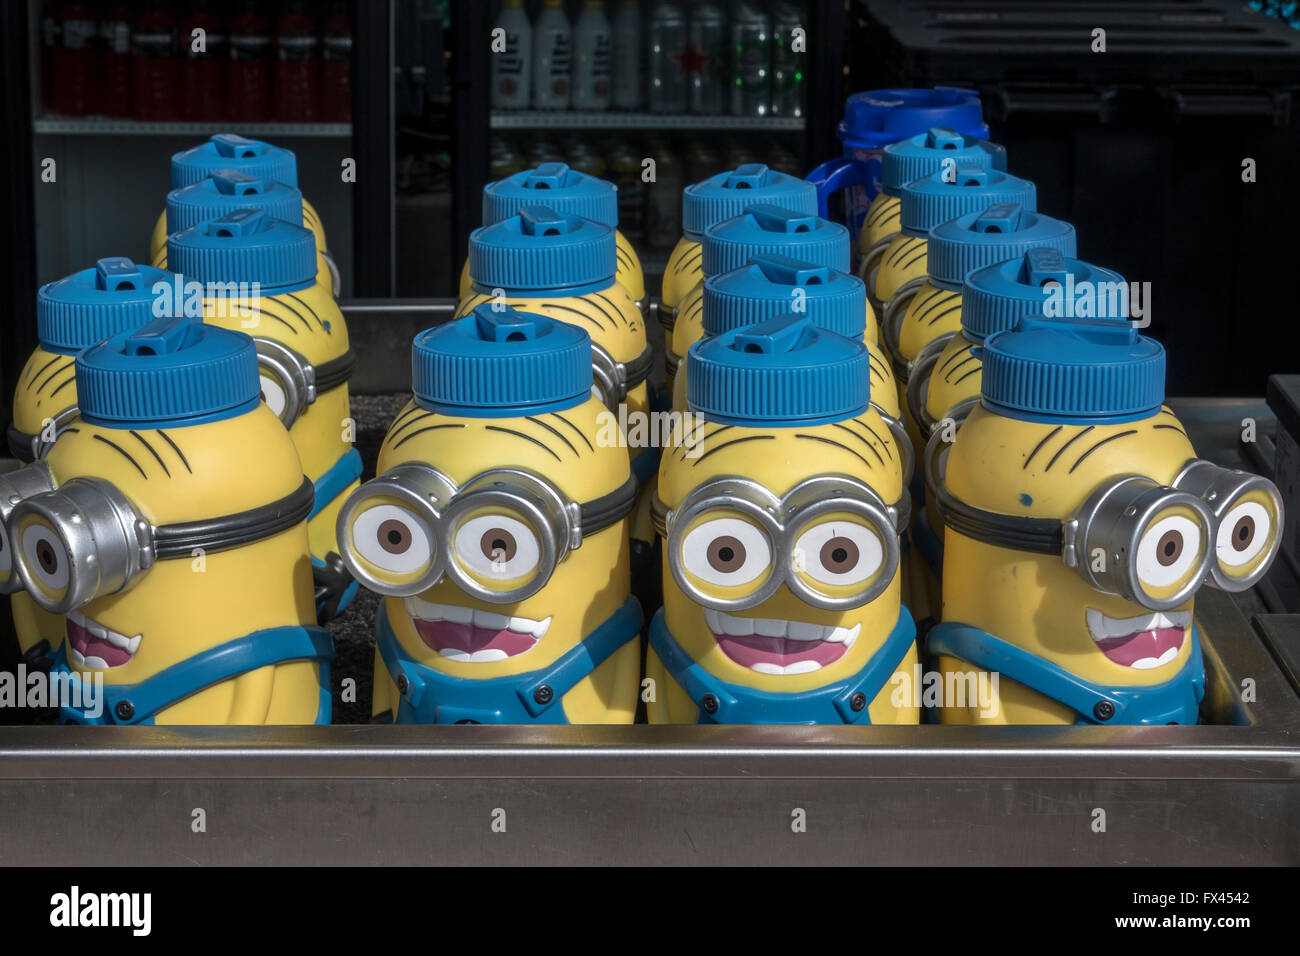 https://c8.alamy.com/comp/FX4542/dave-the-minion-souvenir-water-bottles-on-sale-in-a-retail-store-at-FX4542.jpg